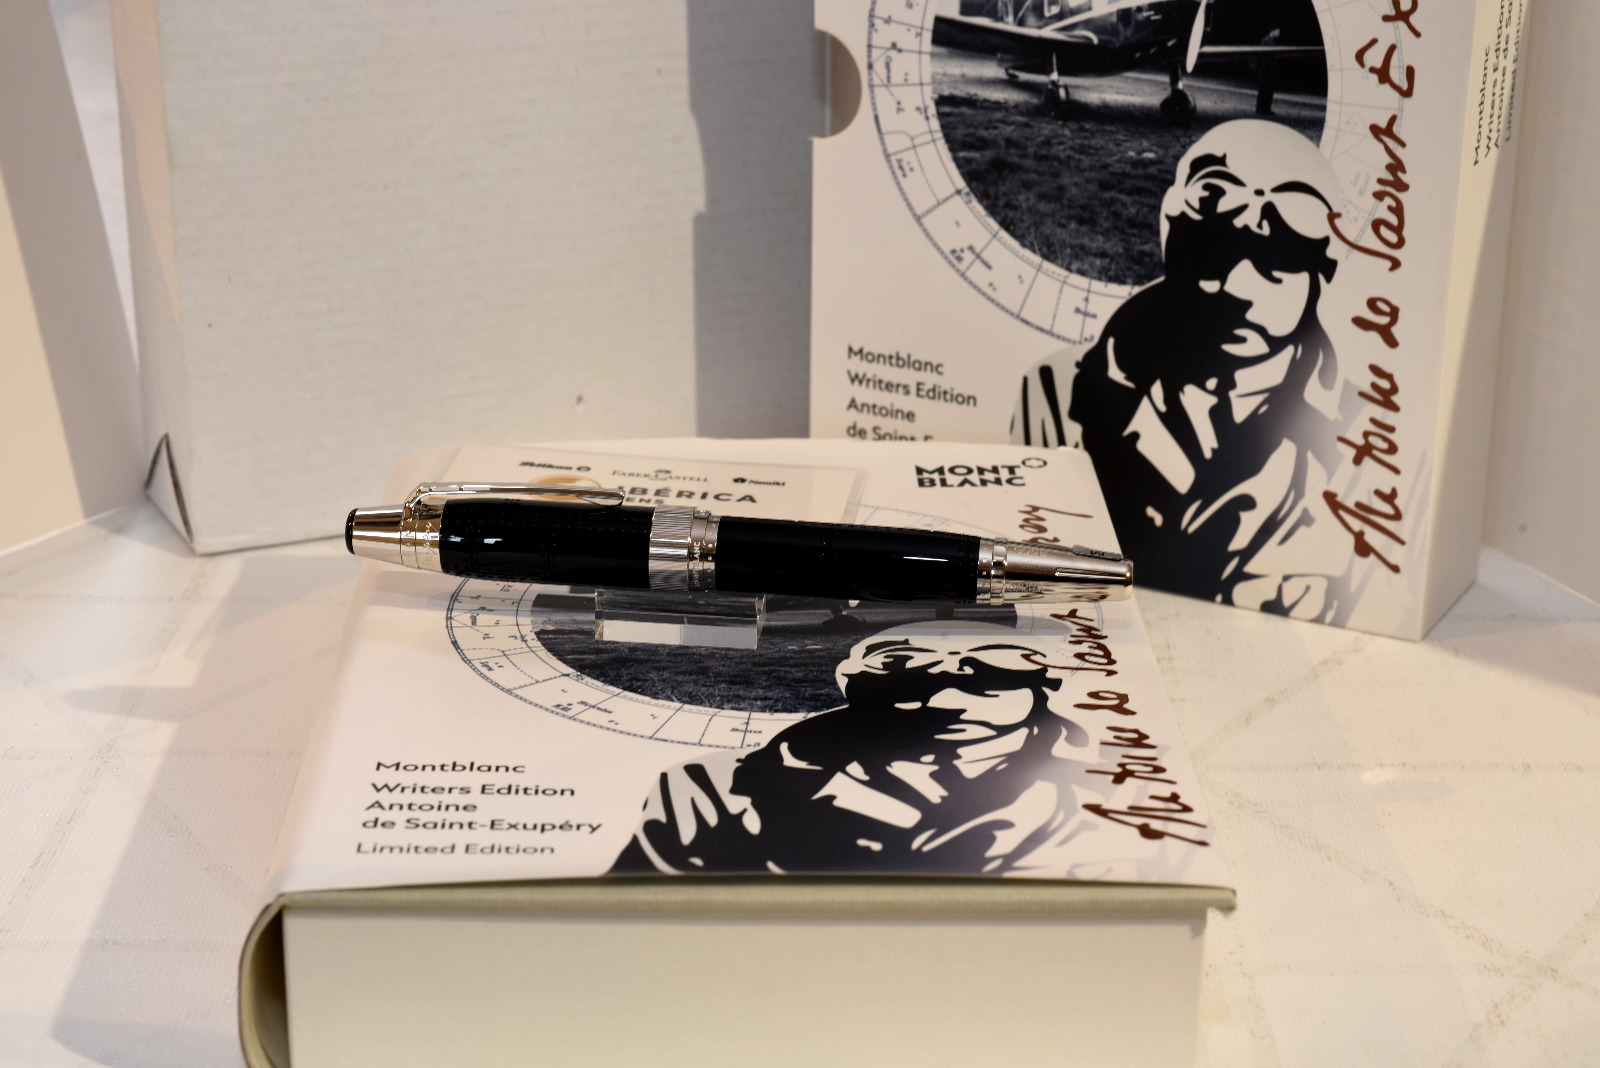 Montblanc Writers Edition Antoine Of Saint Exupery Fountain Pen